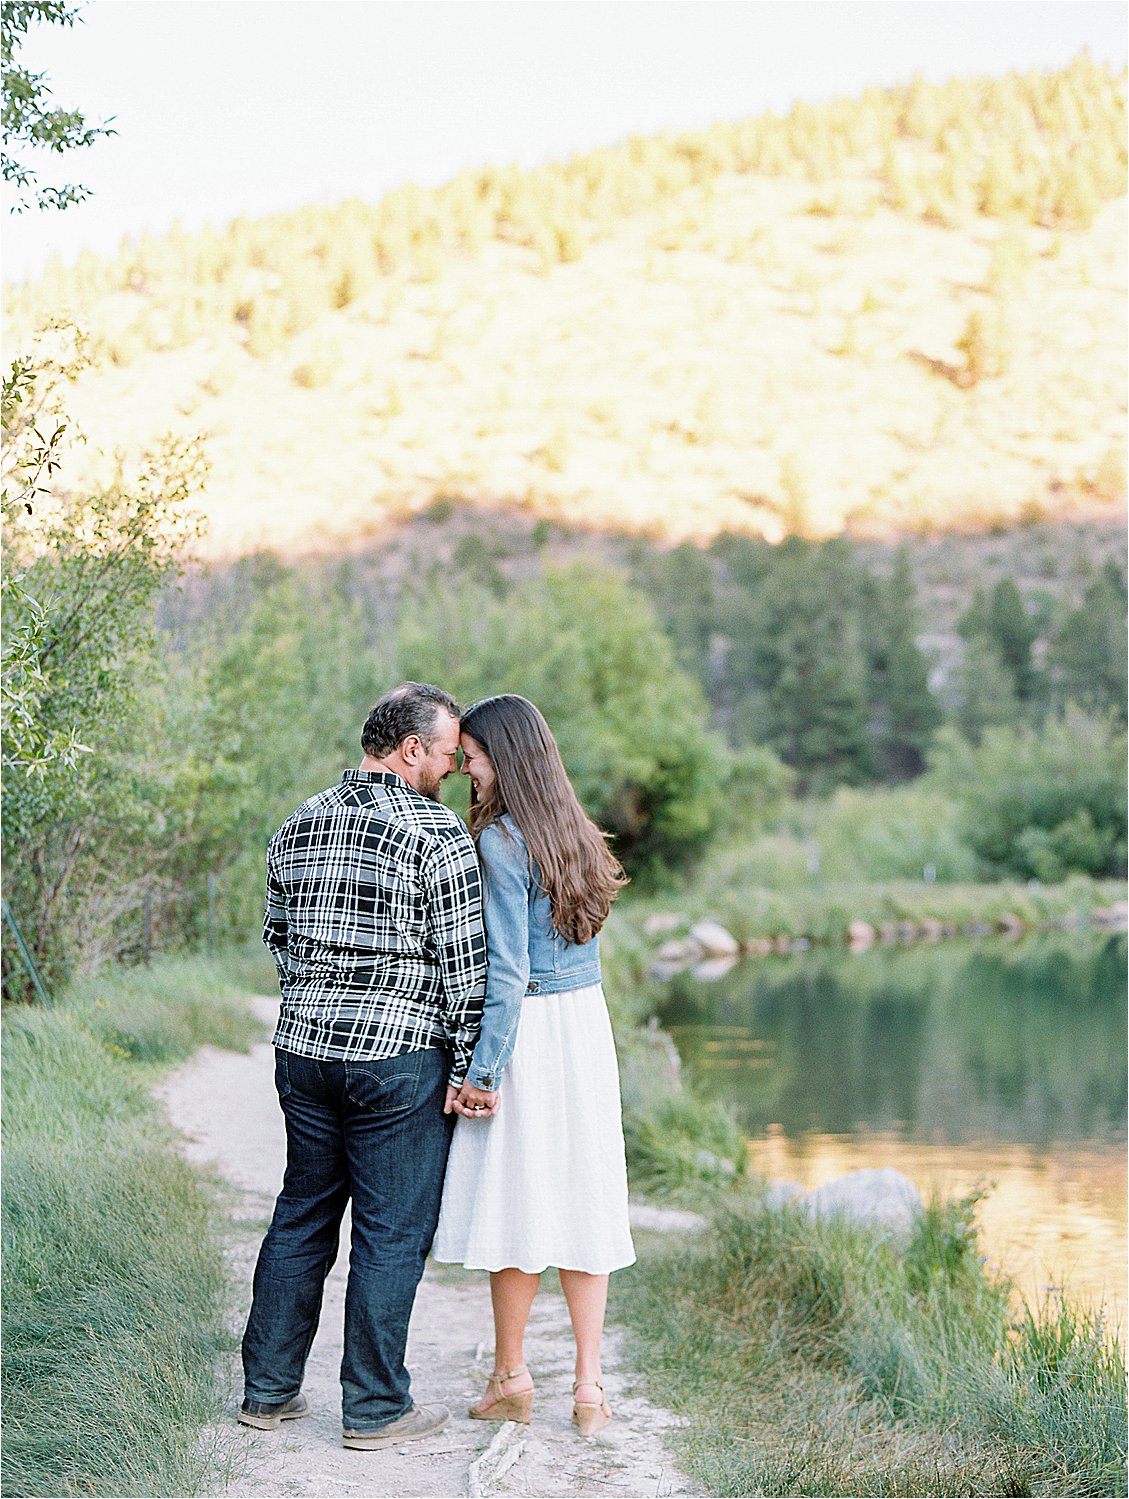 Lakeside Engagement Session in Colorado by Destination Film Wedding Photographer, Renee Hollingshead